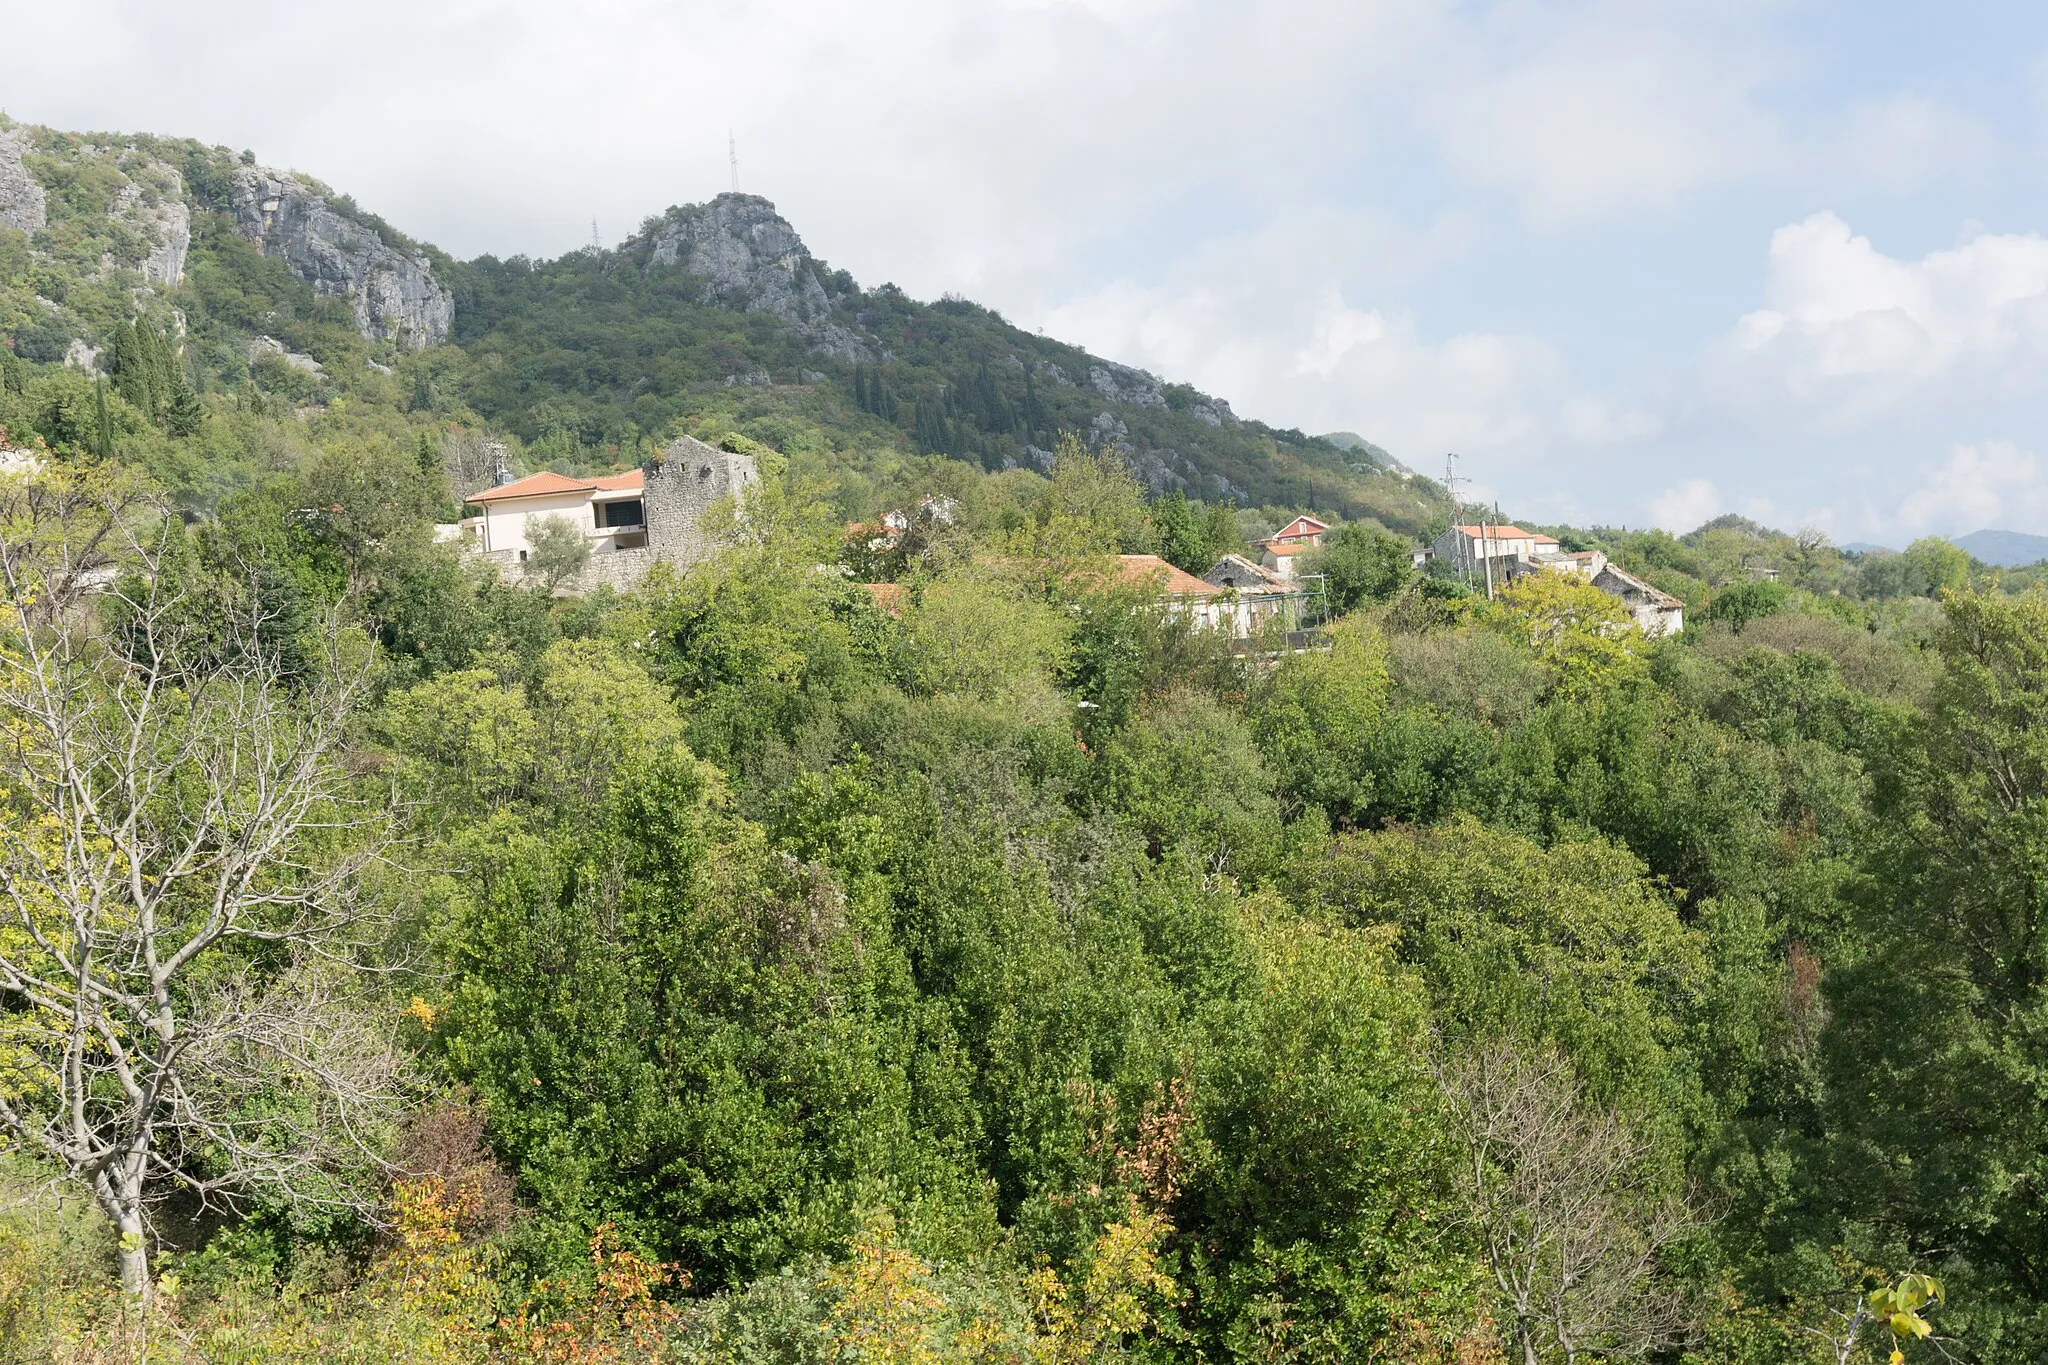 Photo showing: Trebesinj, taken from the trail from Igalo to Herceg Novi, Montenegro